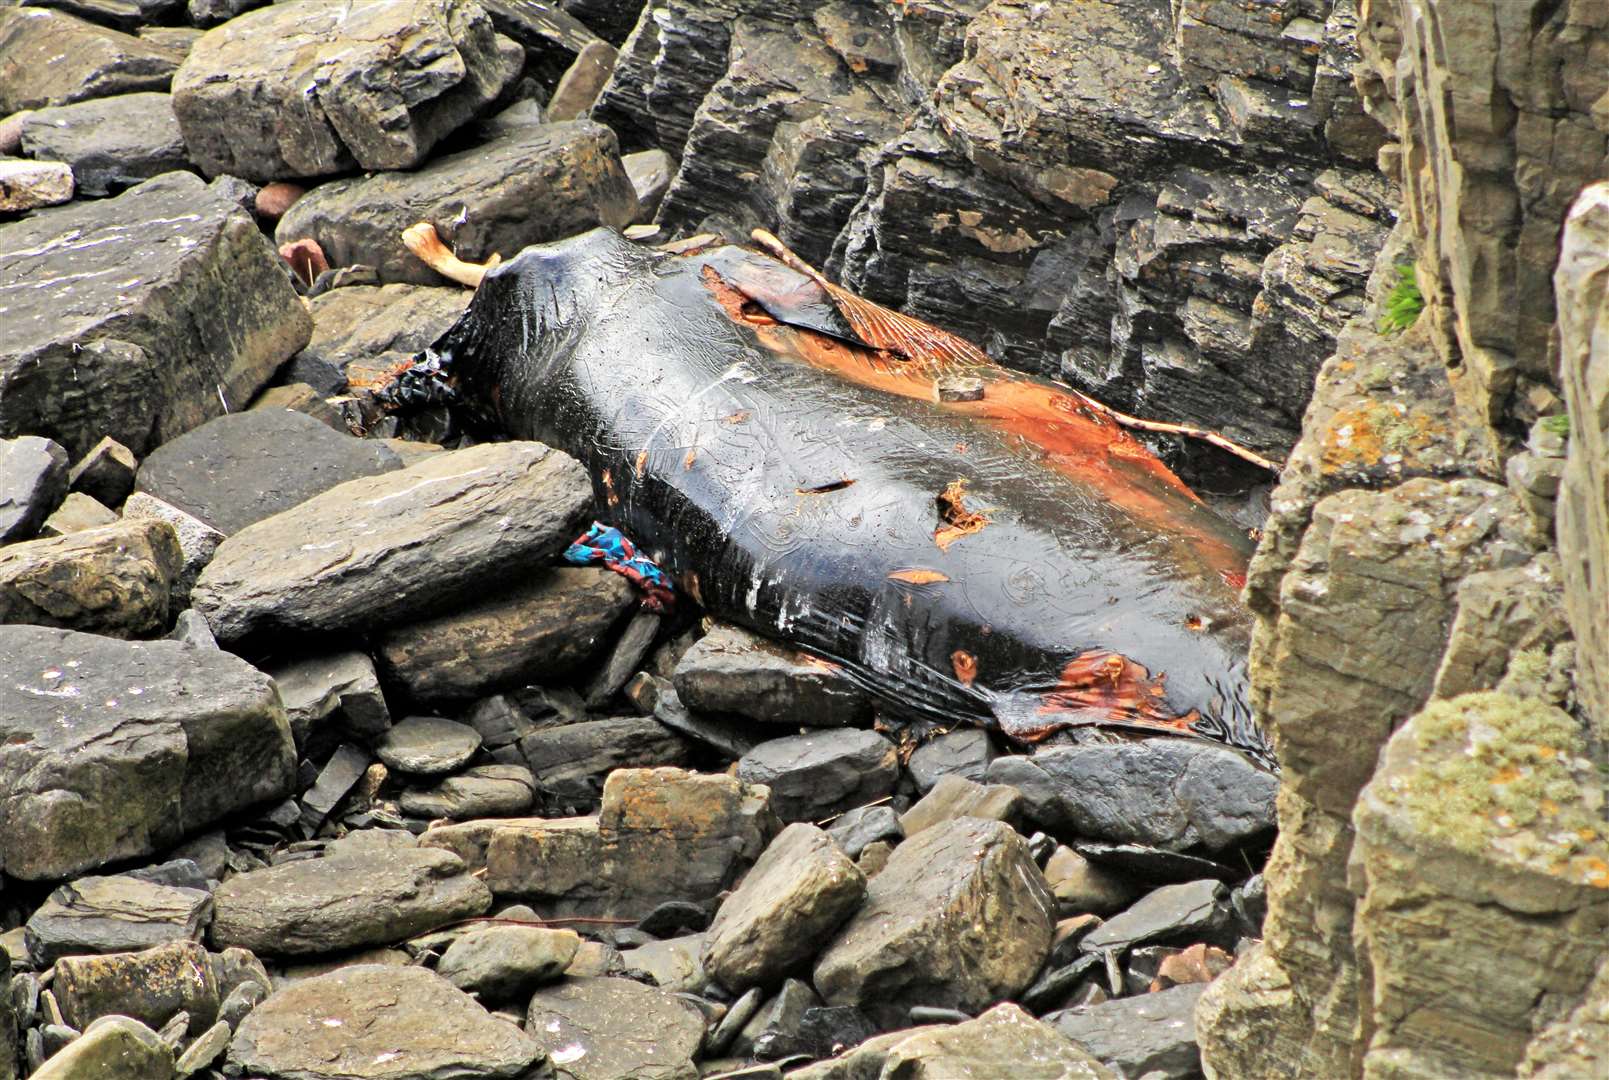 A recent picture shows how the minke whale has significantly decomposed since March, posing a serious health hazard. Picture: Alan Hendry